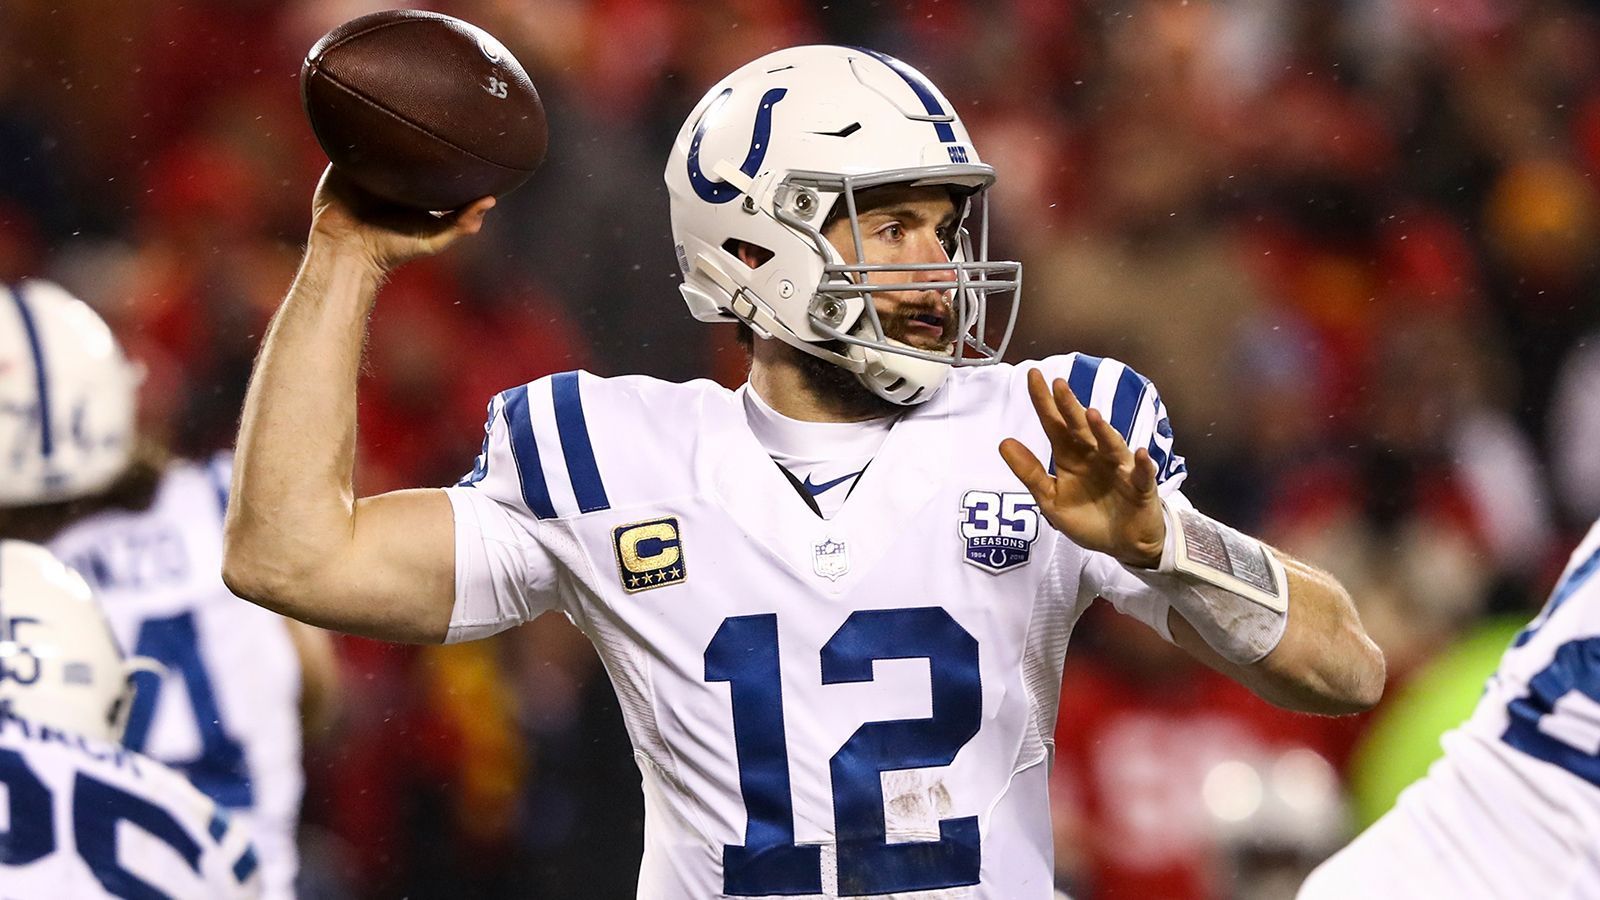 
                <strong>Indianapolis Colts (Andrew Luck)</strong><br>
                23.645.000 für drei Quarterbacks
              